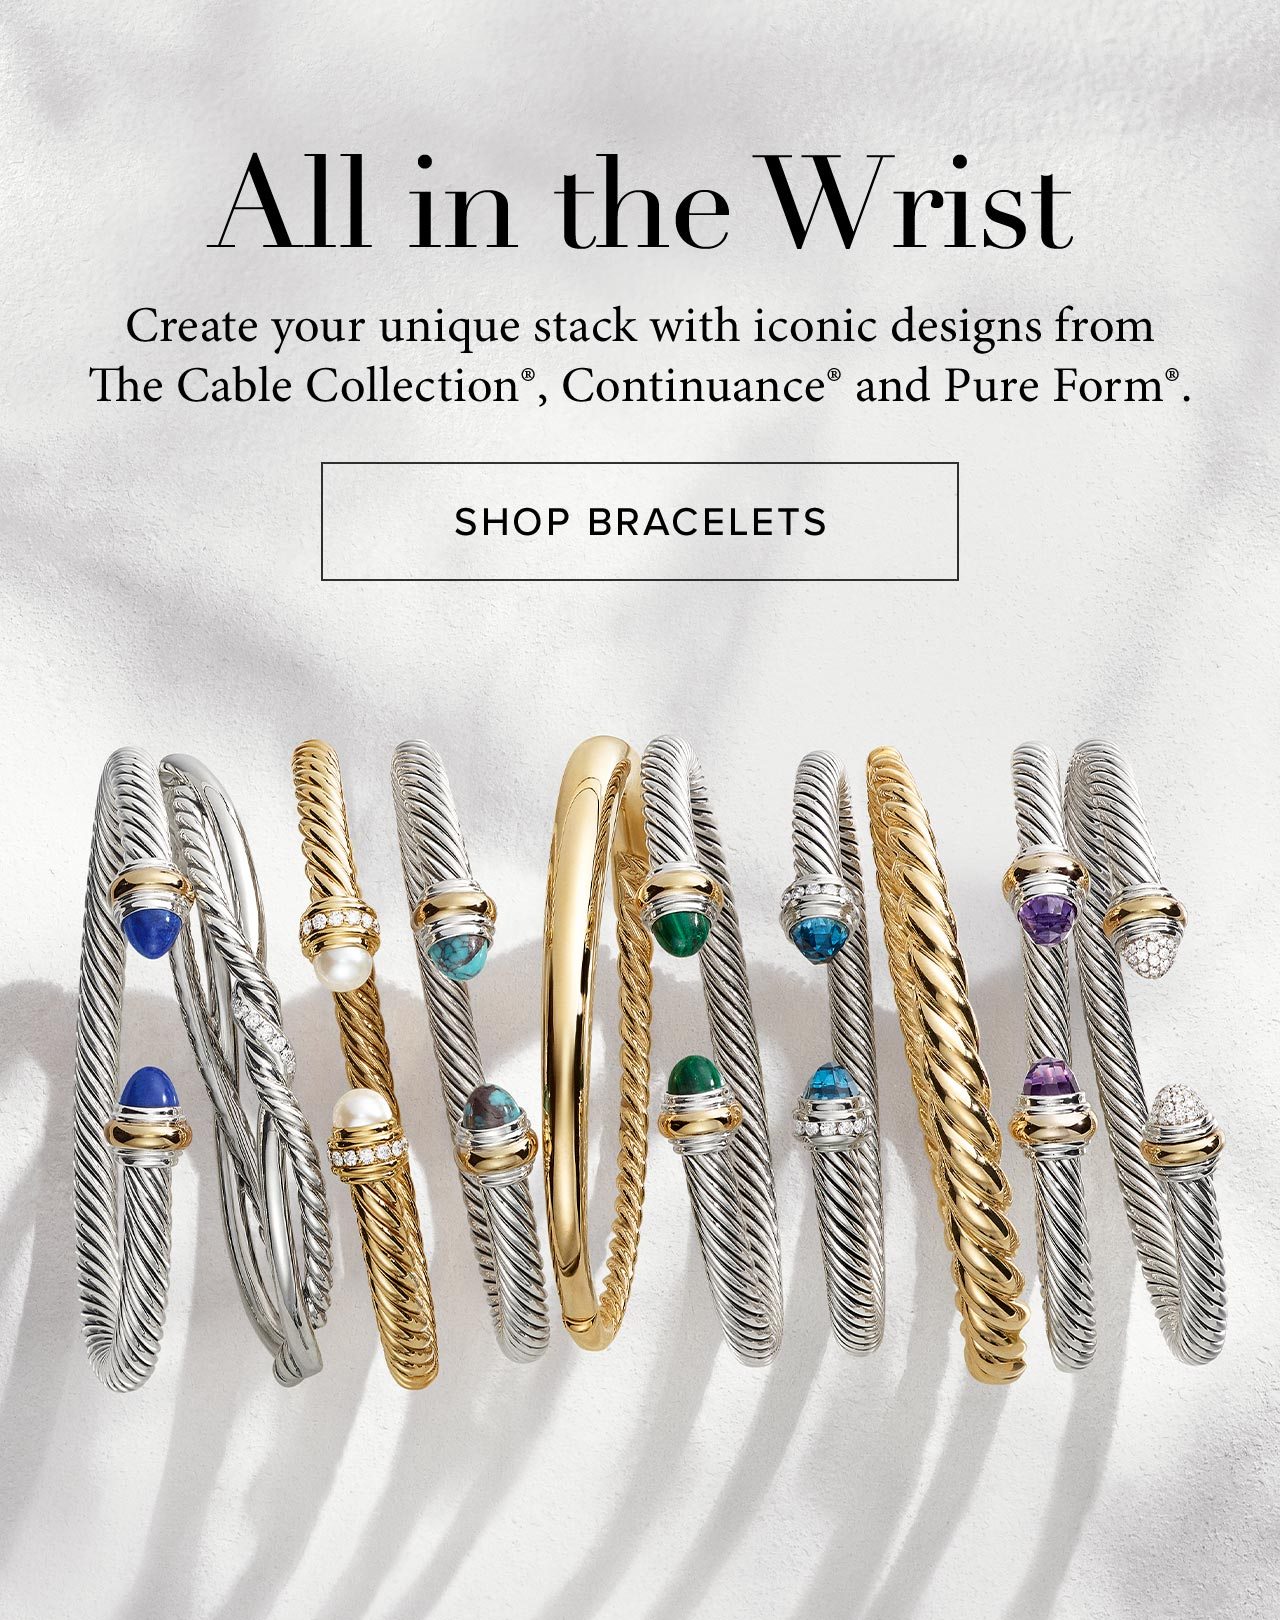 David Yurman on Twitter Signature style add our new Renaissance bracelet  in glowing 18k yellow gold now in 3mm to your stack of radiant bracelets  httpstcoxgNMHfnrgZ httpstcoQ4Ije1IIs9  Twitter